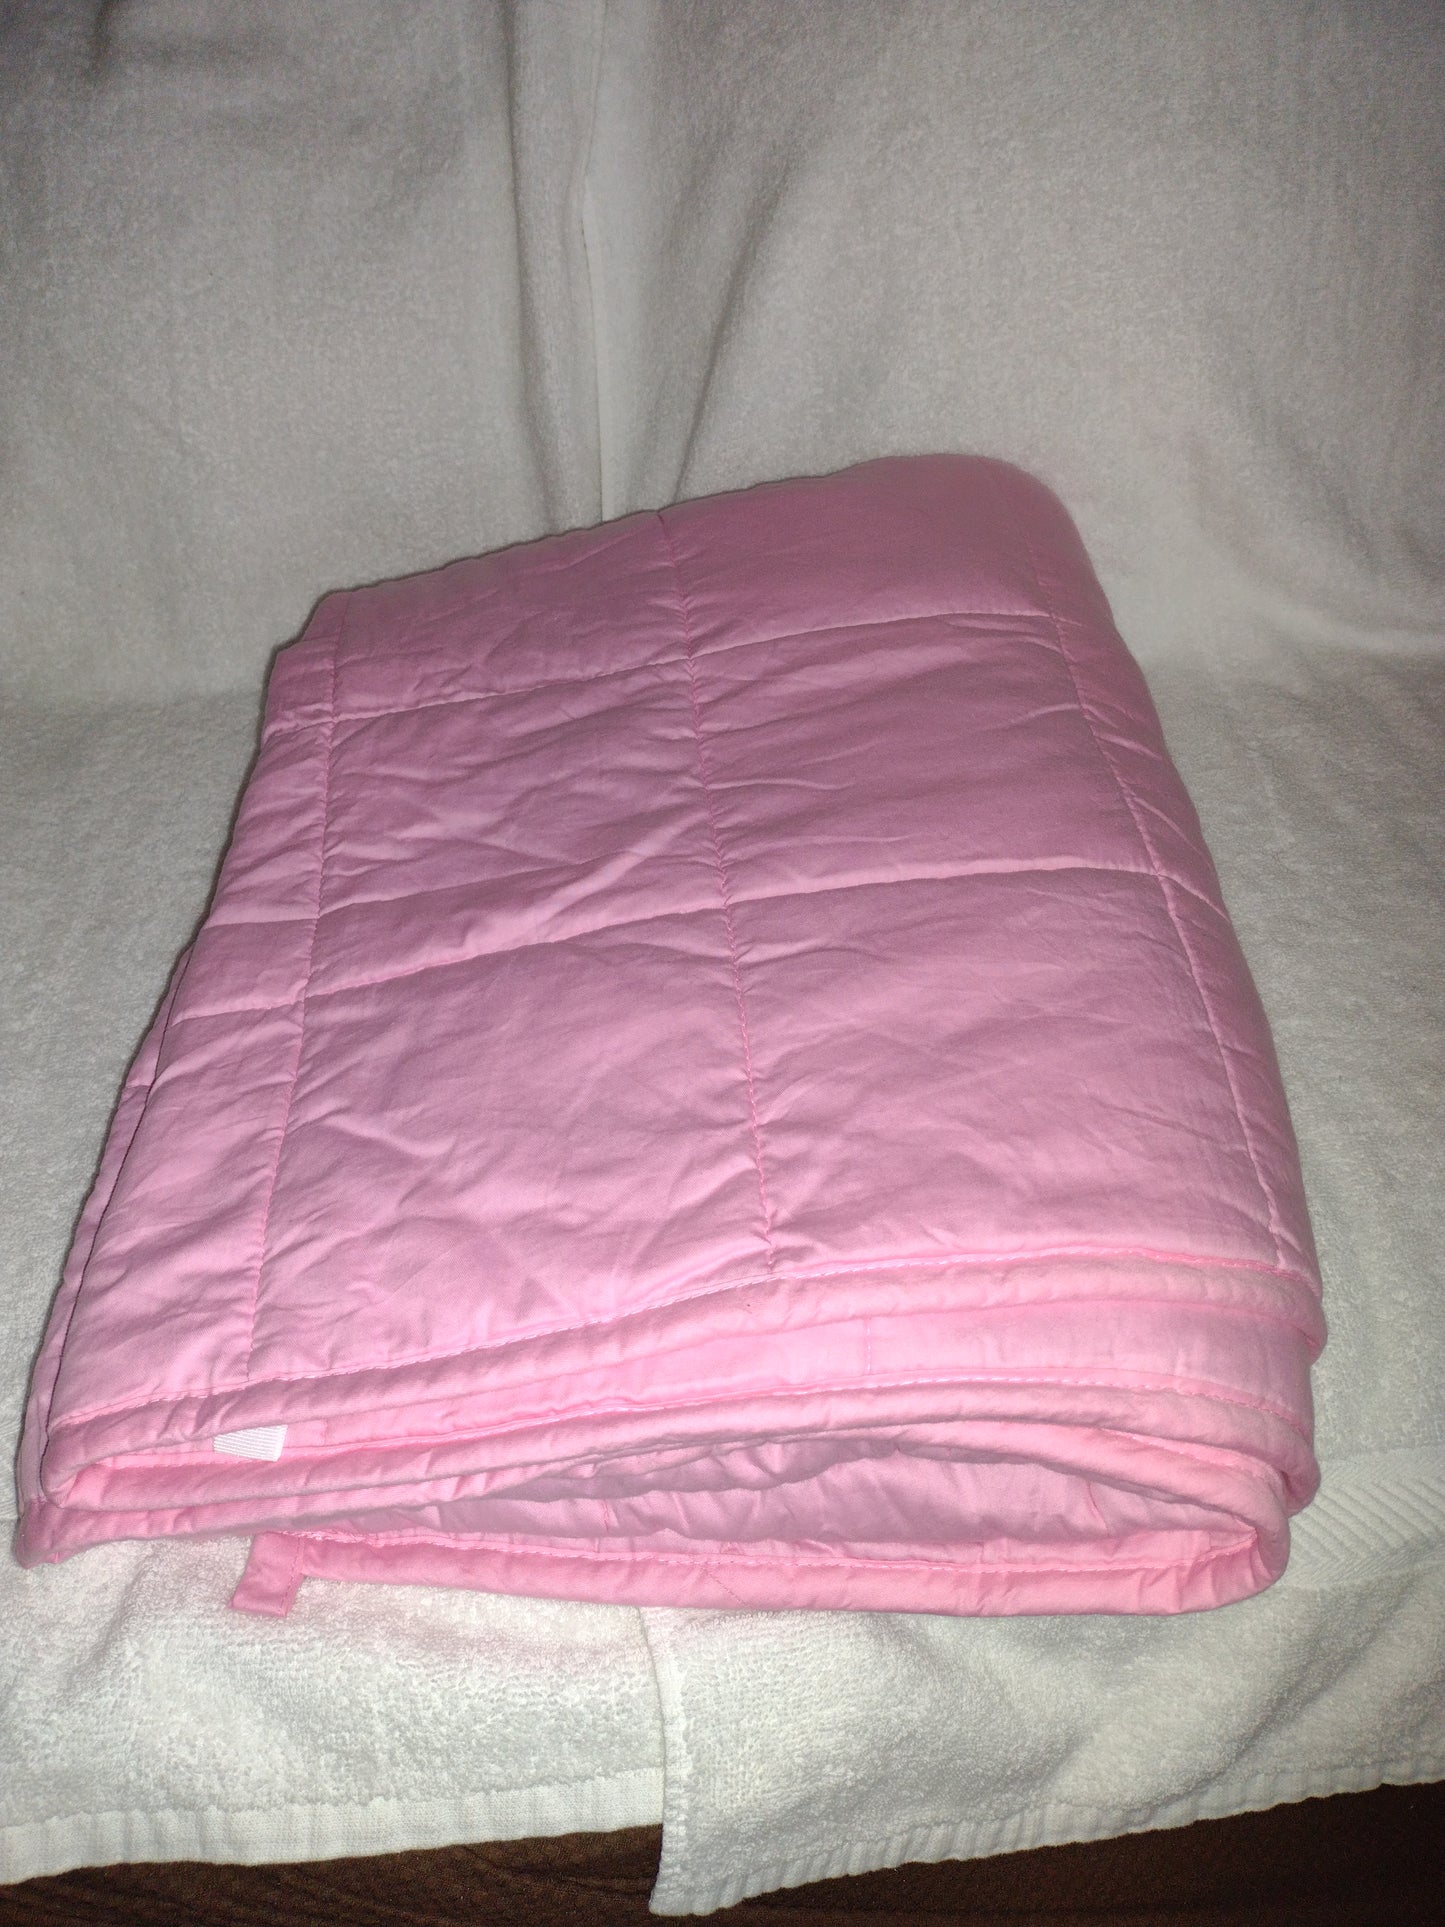 15lb. Queen Size Weighted Blanket by RelaxBlanket Pink